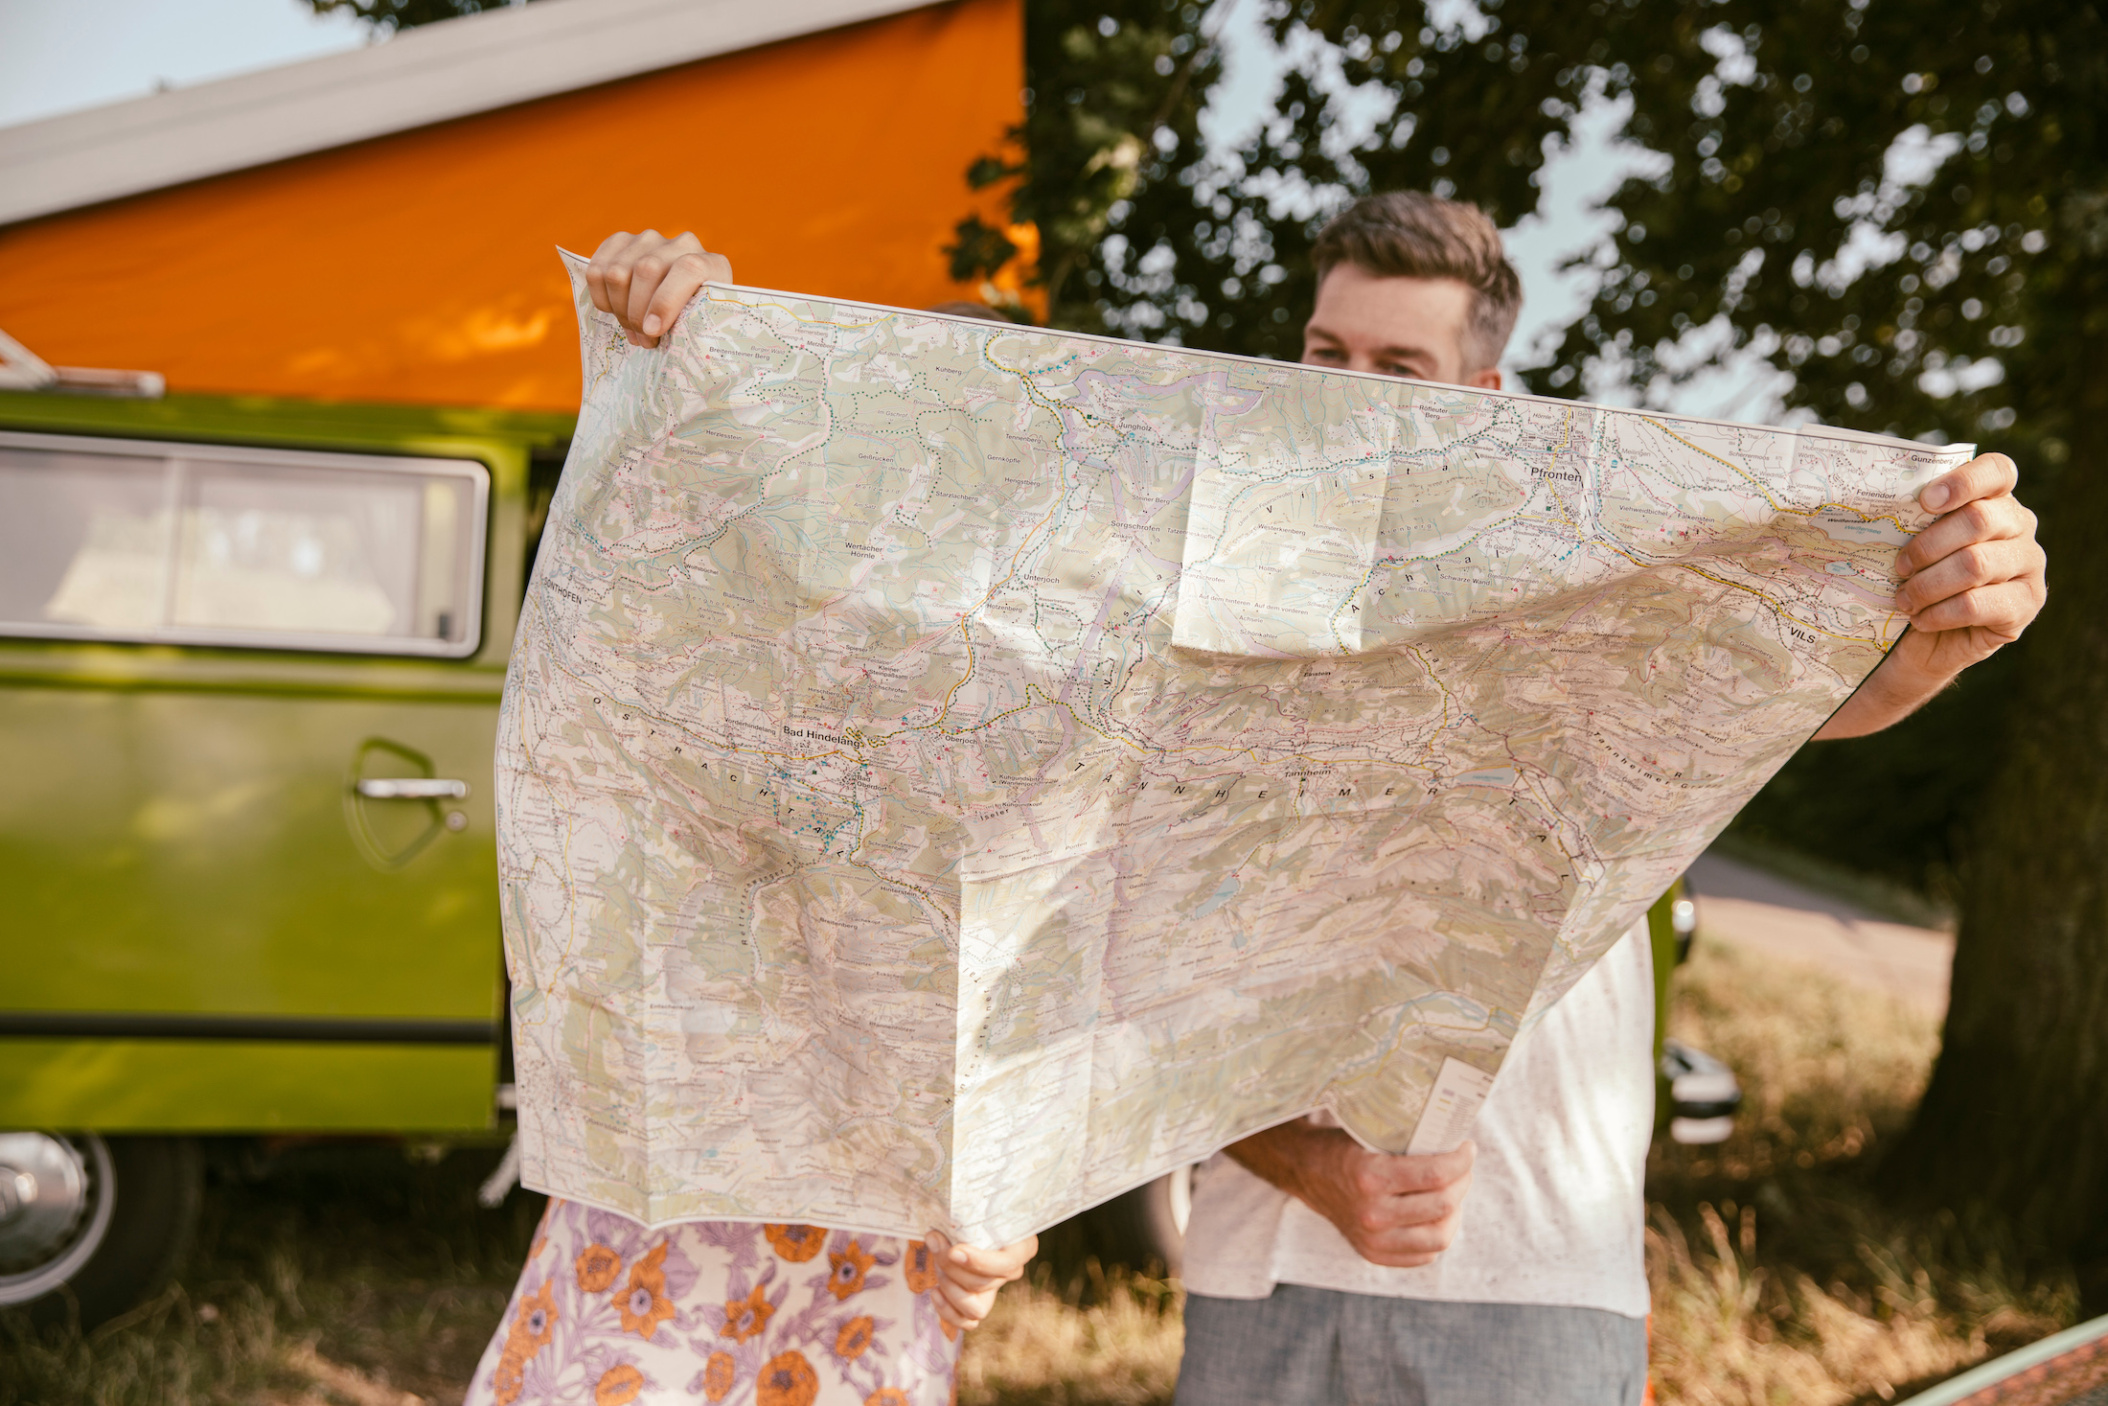 Couple looking at map in front of their T2 bus on a summer trip through North Rhine-Westfalia, Germany